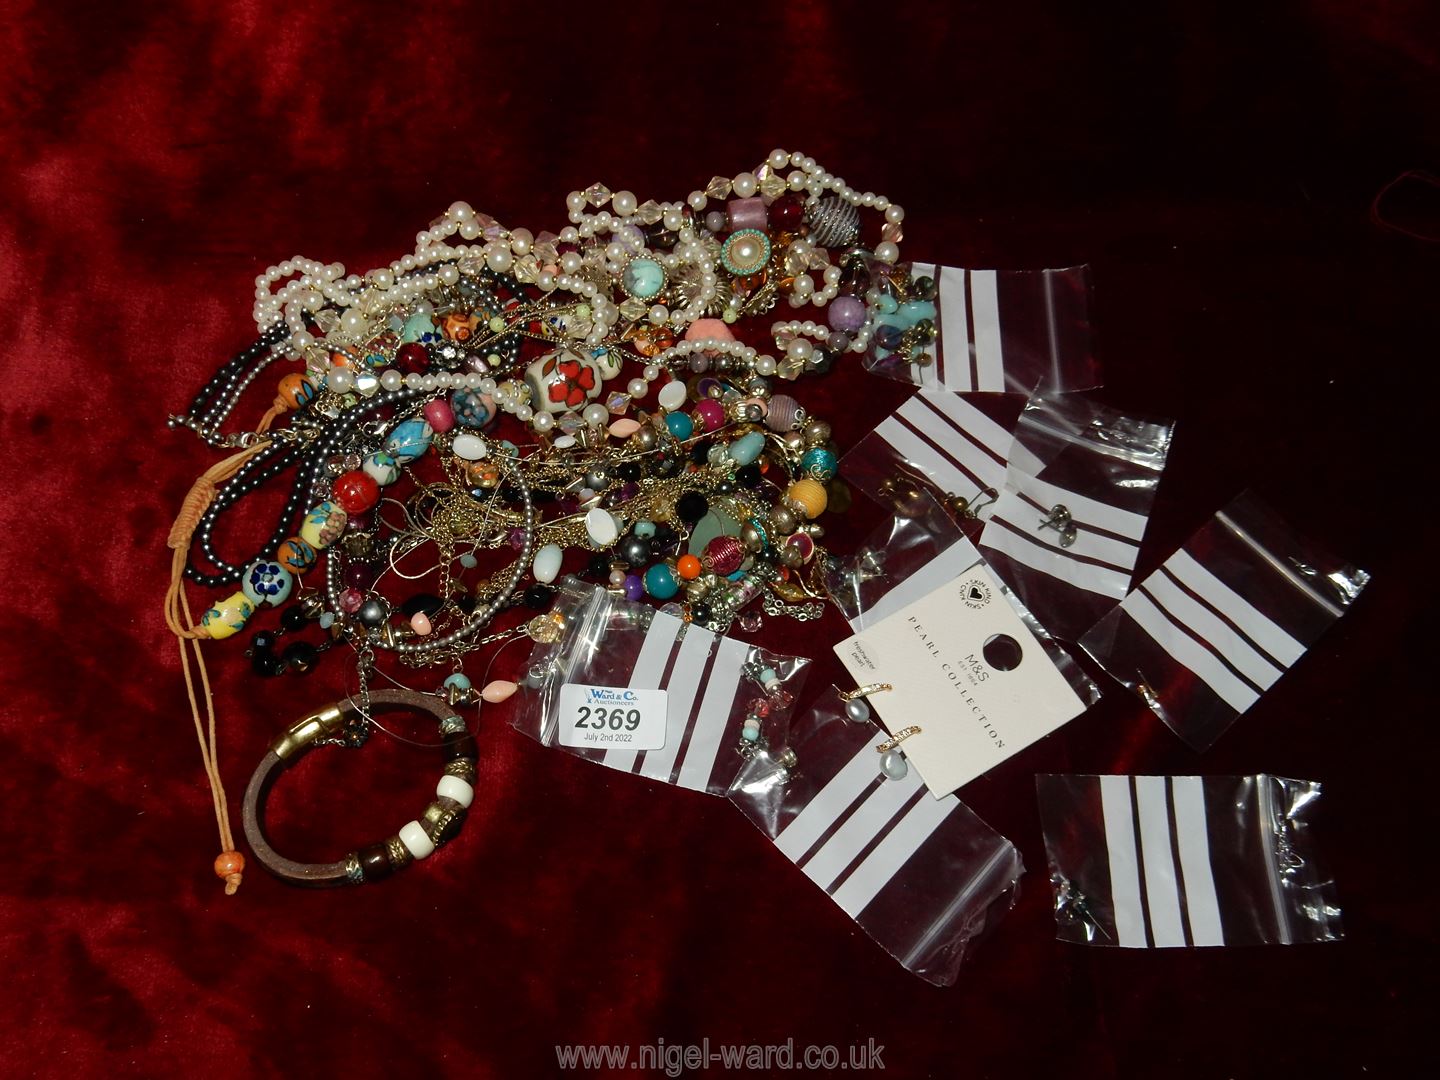 A quantity of costume jewellery, necklaces and earrings.